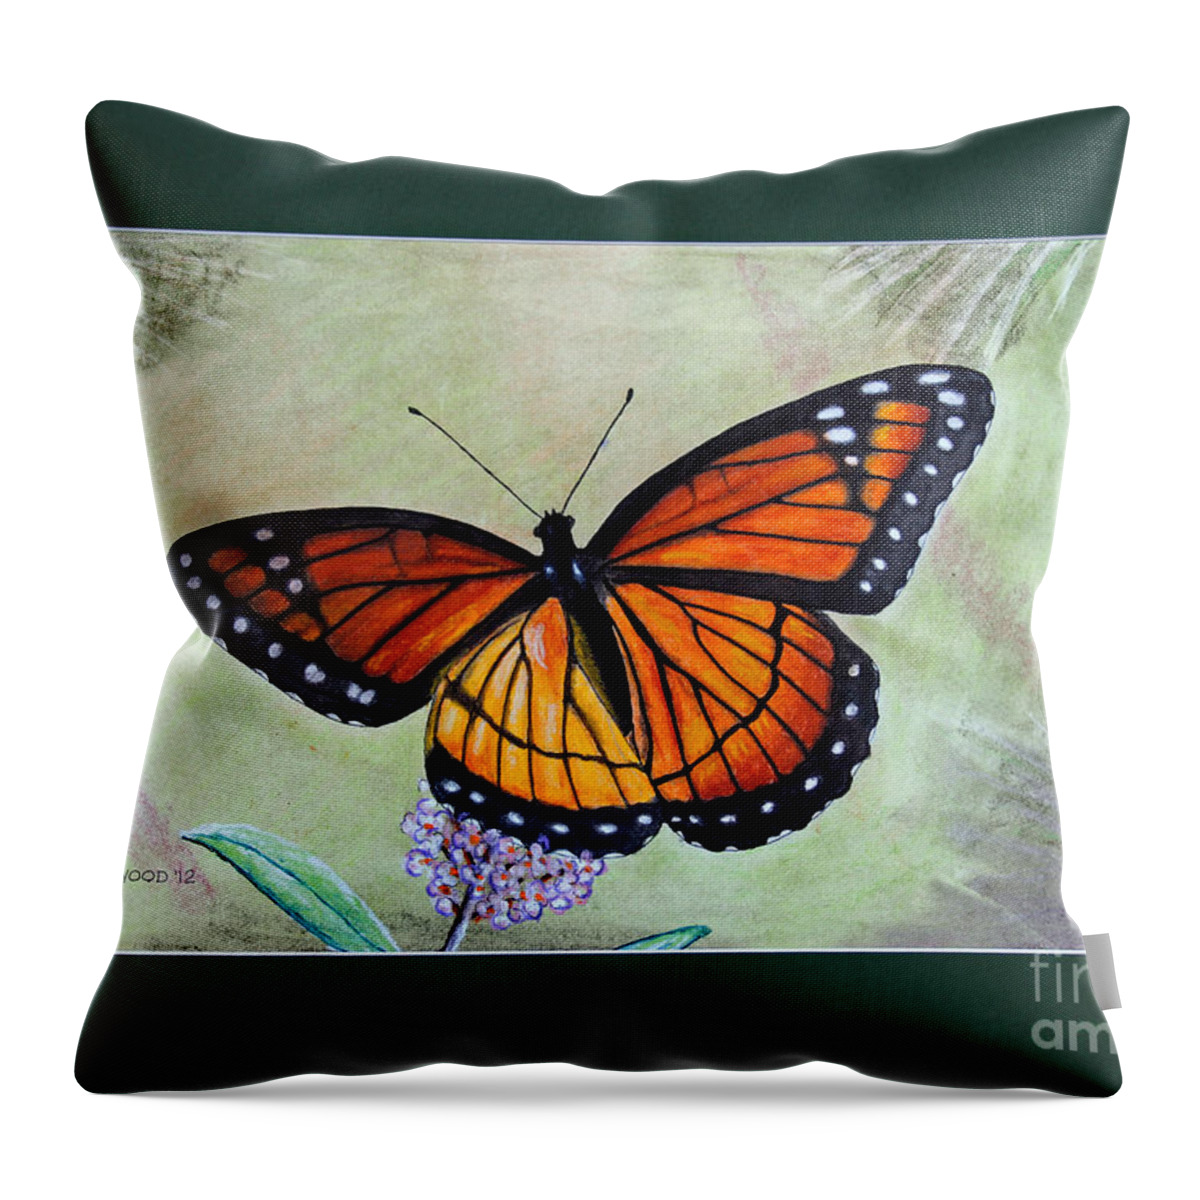 Viceroy Butterfly Throw Pillow featuring the photograph Viceroy Butterfly by George Wood by Karen Adams